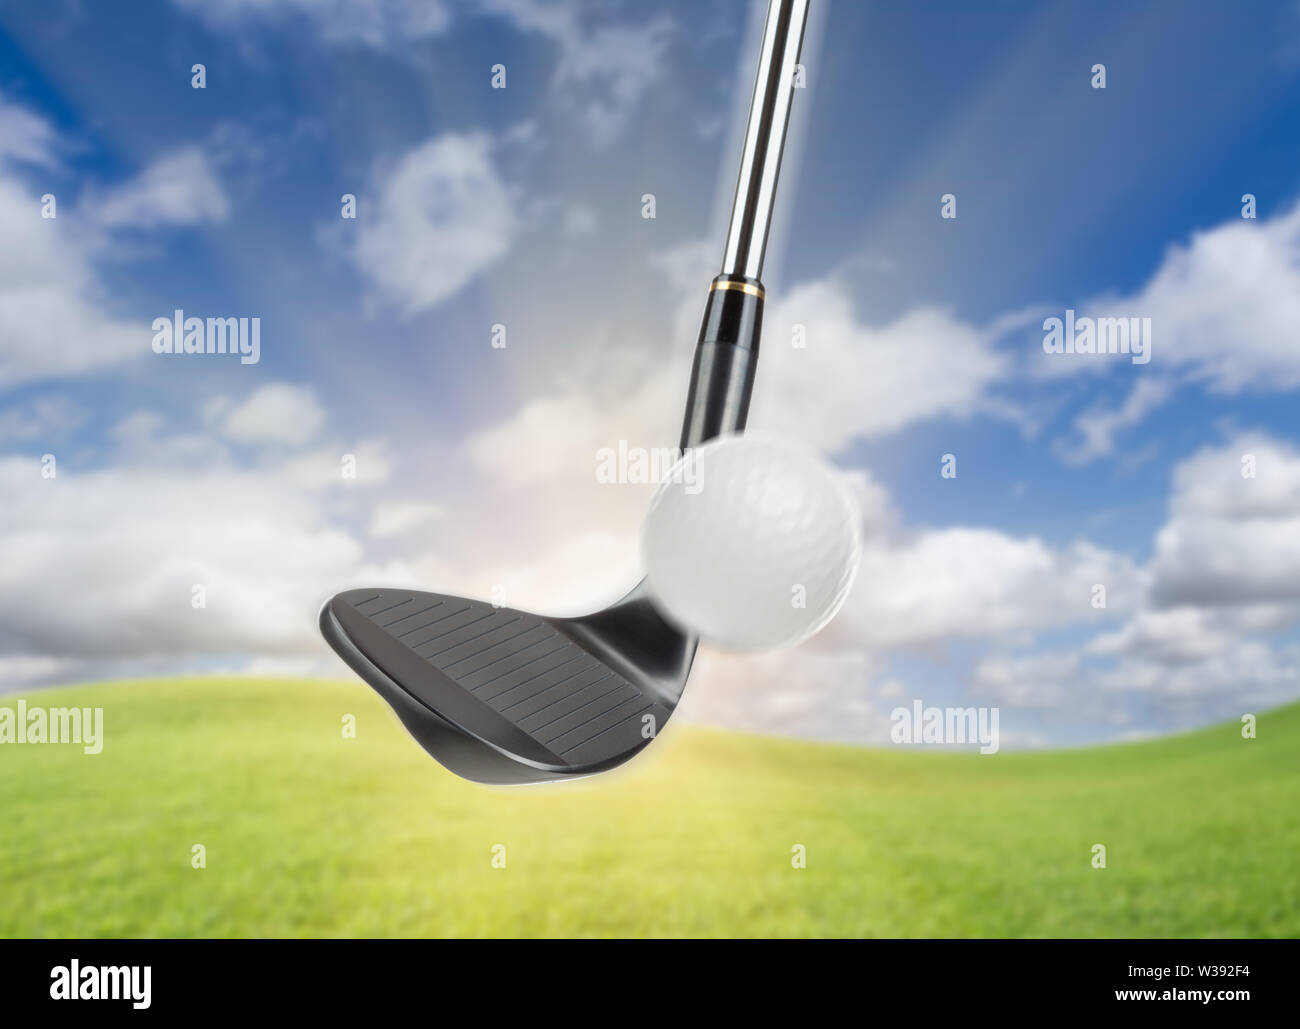 Black Golf Club Wedge Iron Hitting Golf Ball Against Grass and Blue Sky  Background Stock Photo - Alamy